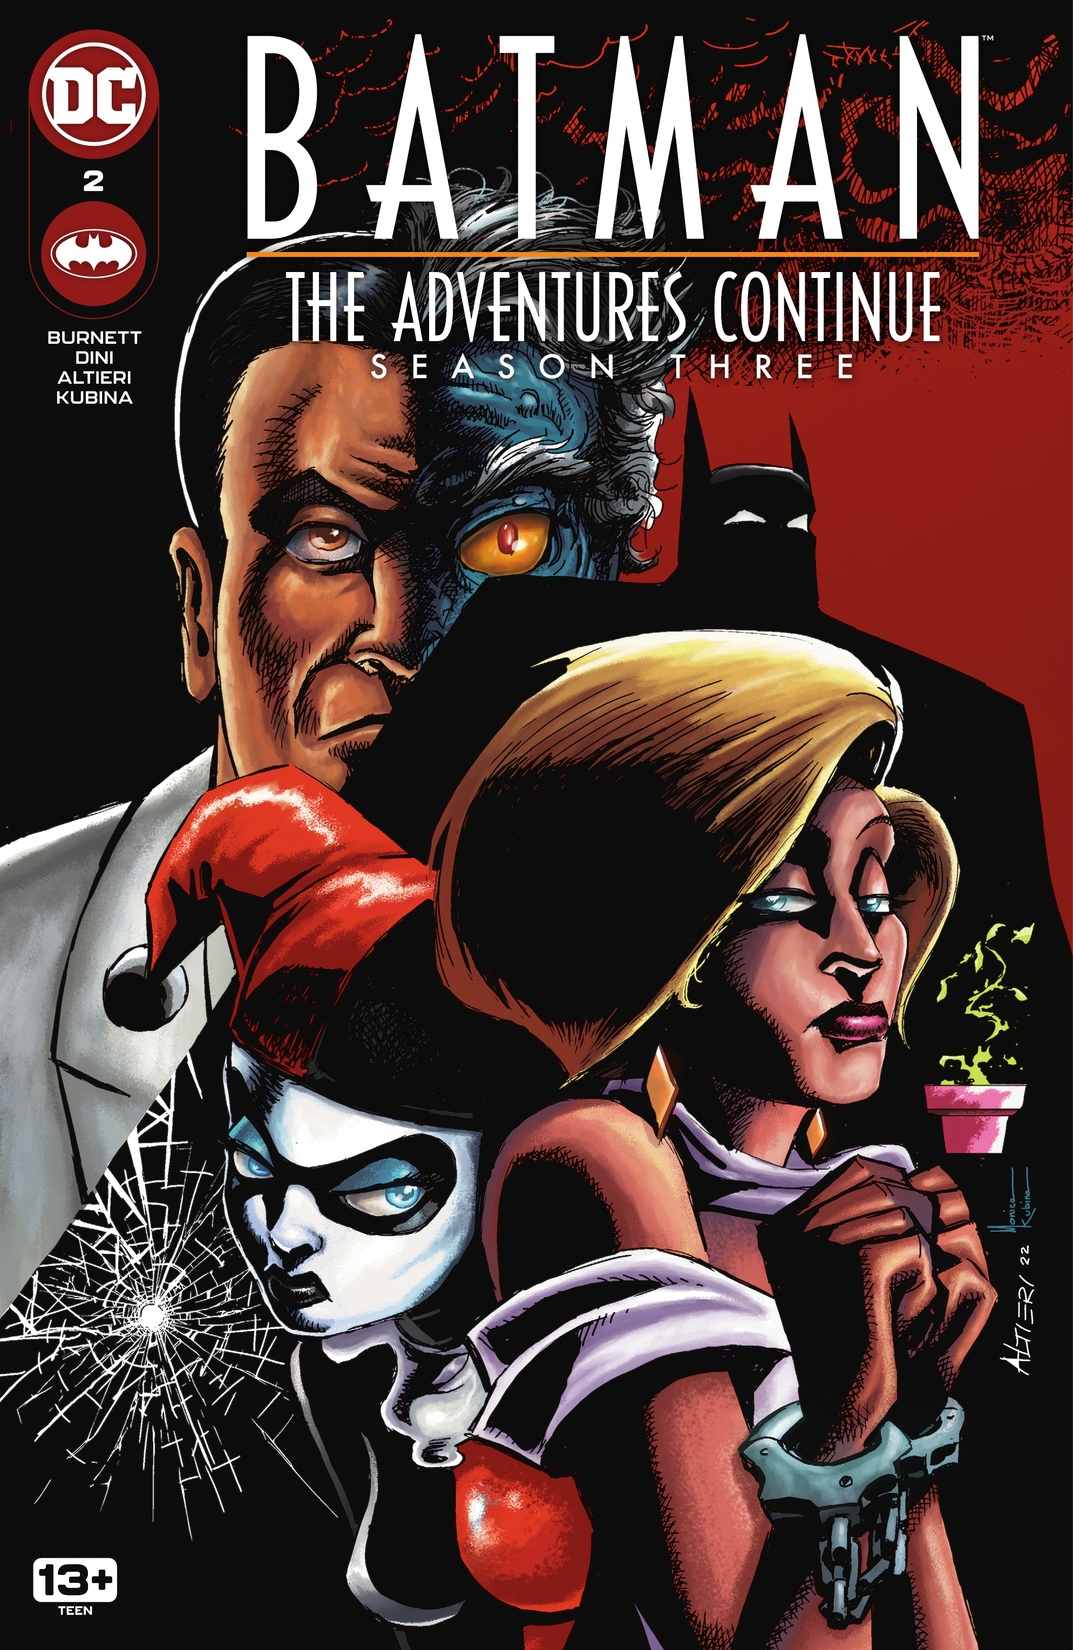 Batman: The Adventures Continue Season Three #2 preview images